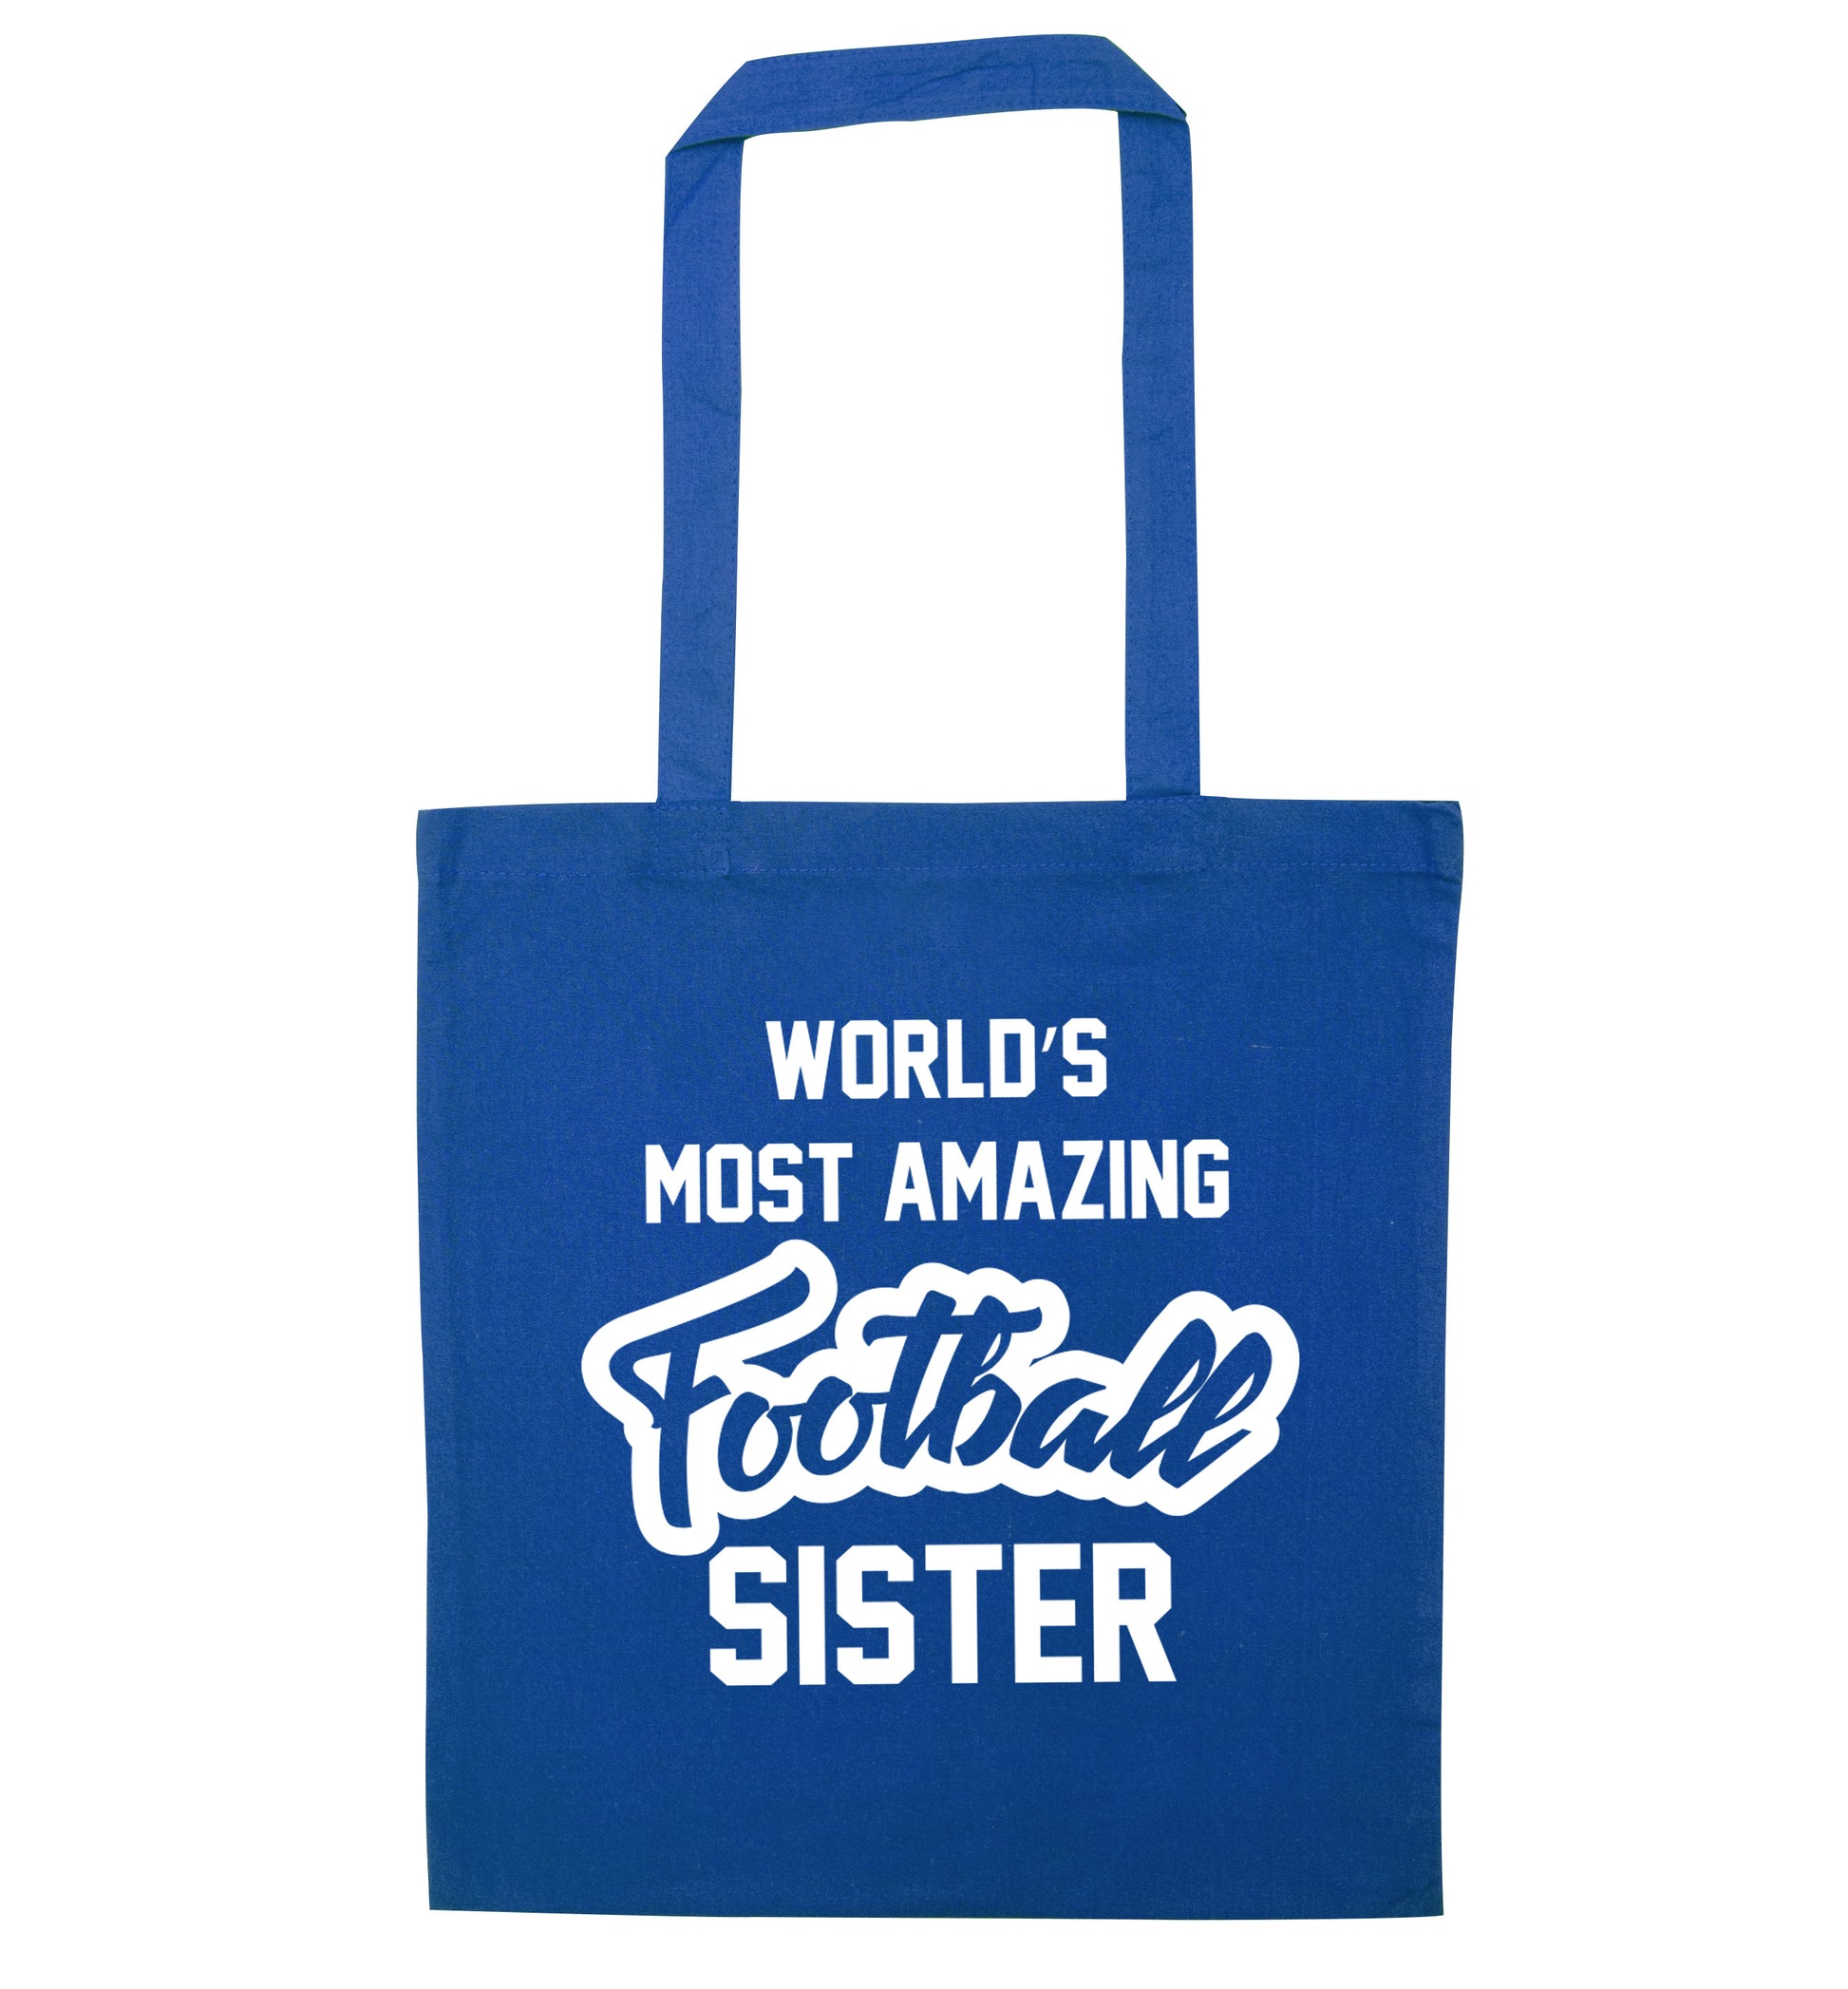 Worlds most amazing football sister blue tote bag